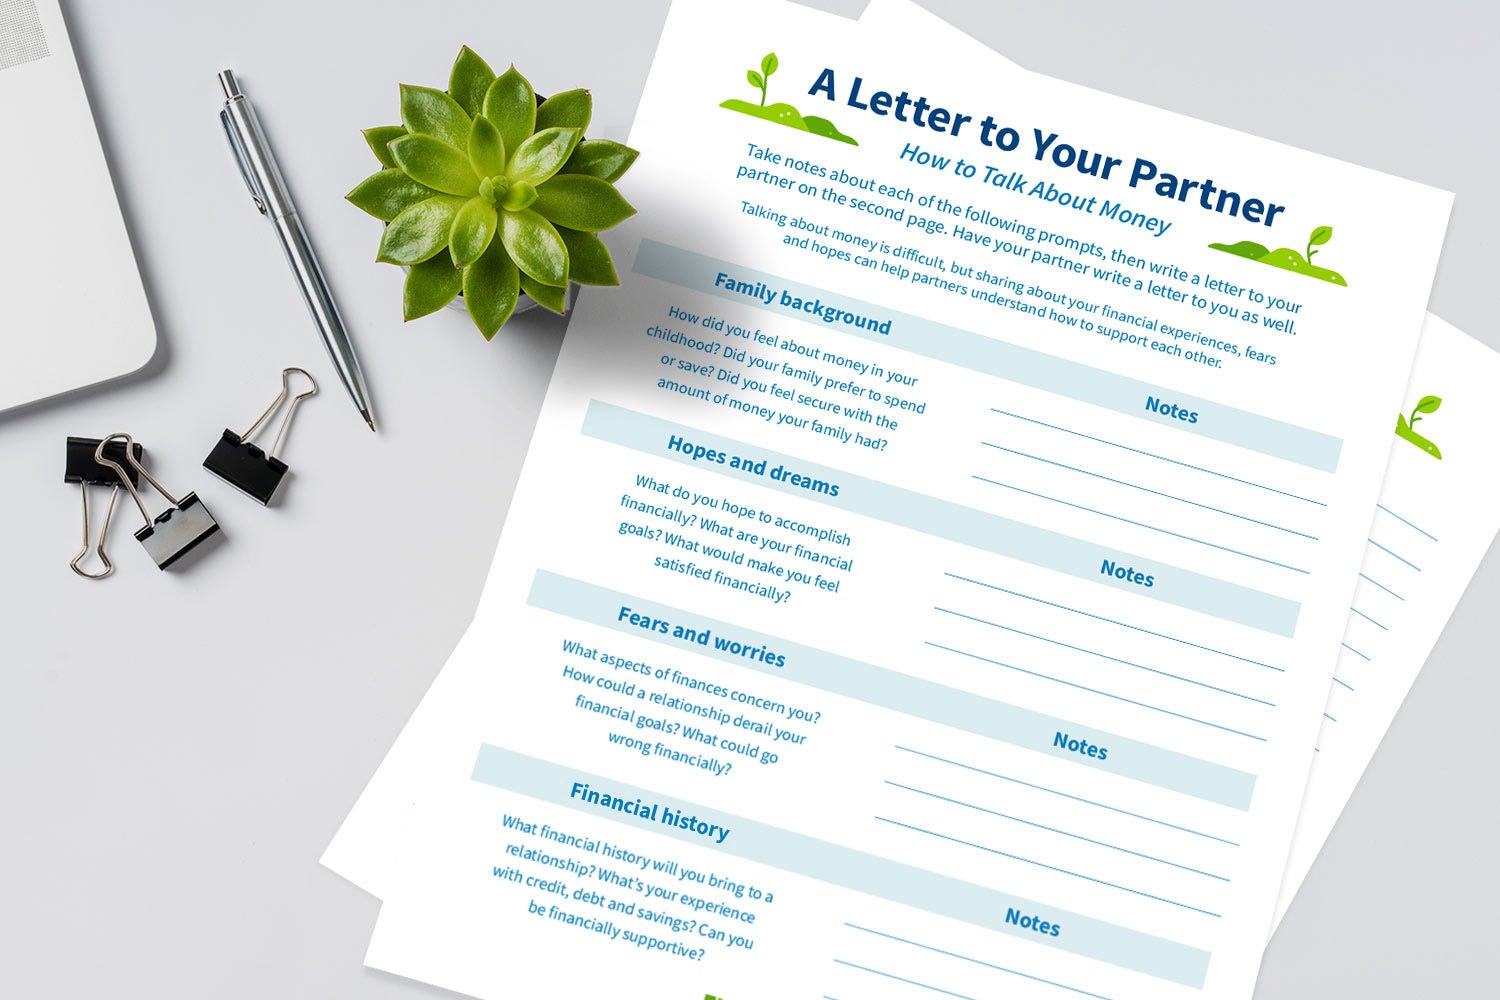 A letter to your partner